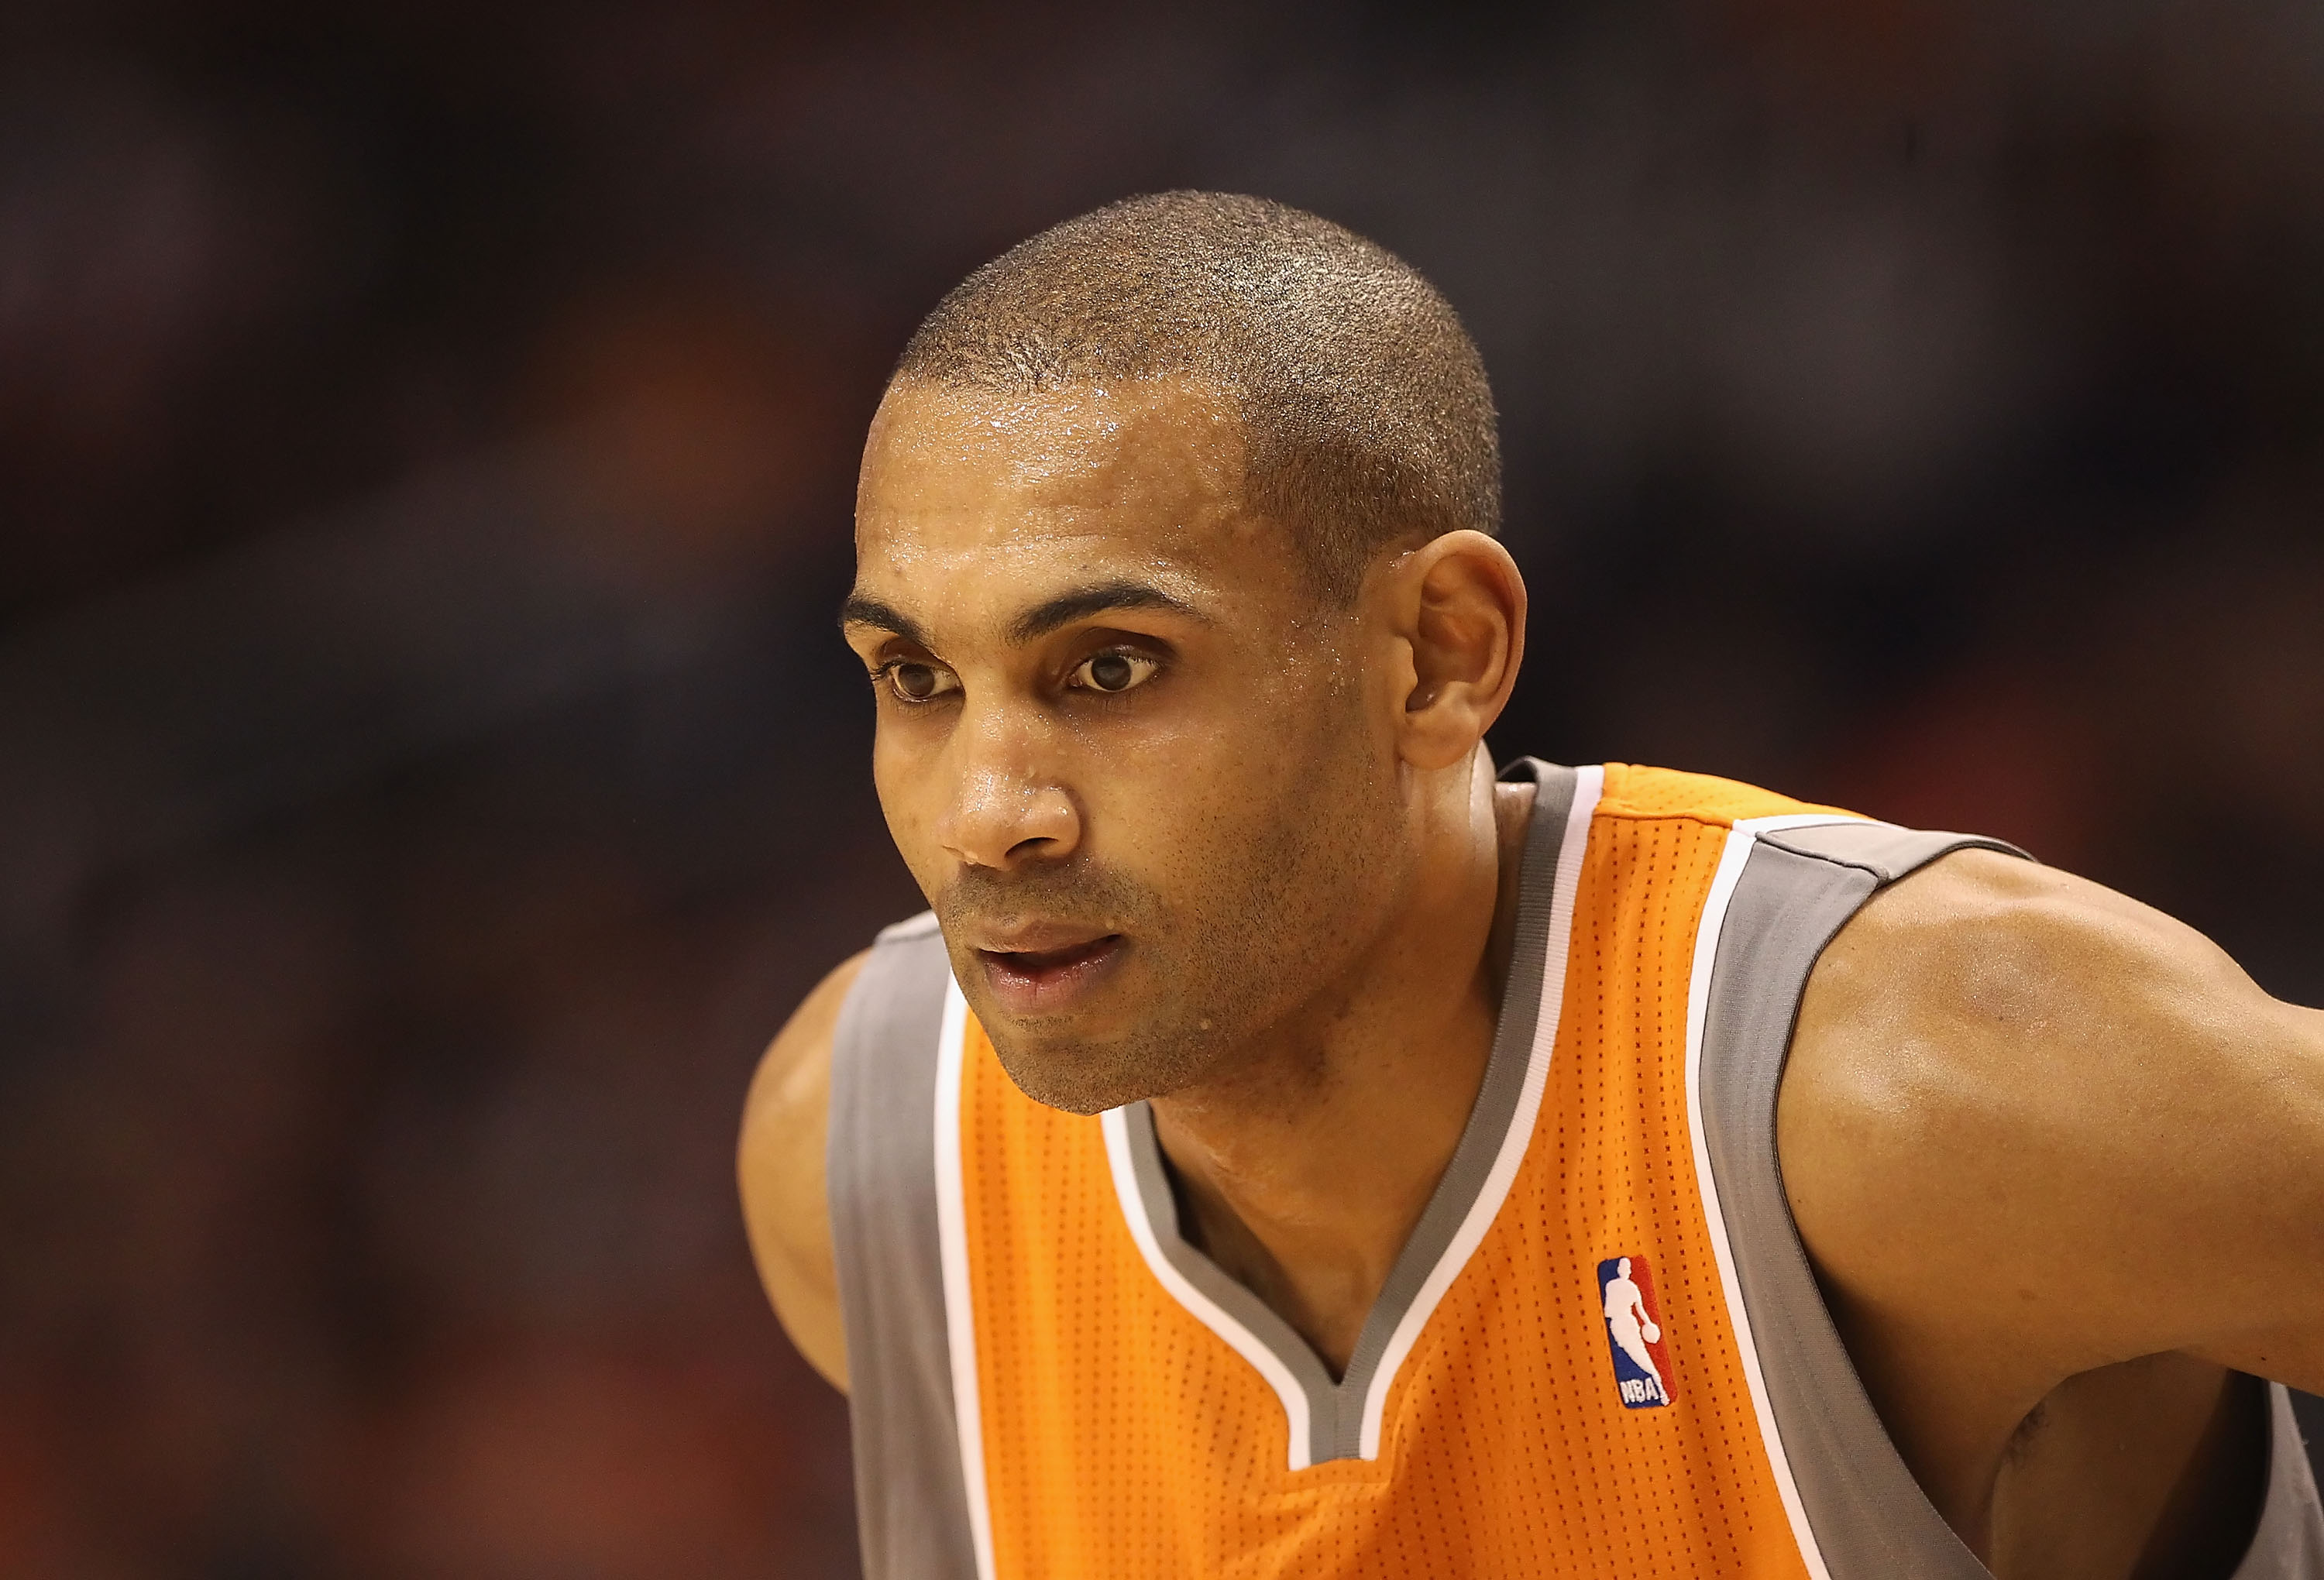 A Deadly Infection Nearly Ended Grant Hill’s NBA Career and Life